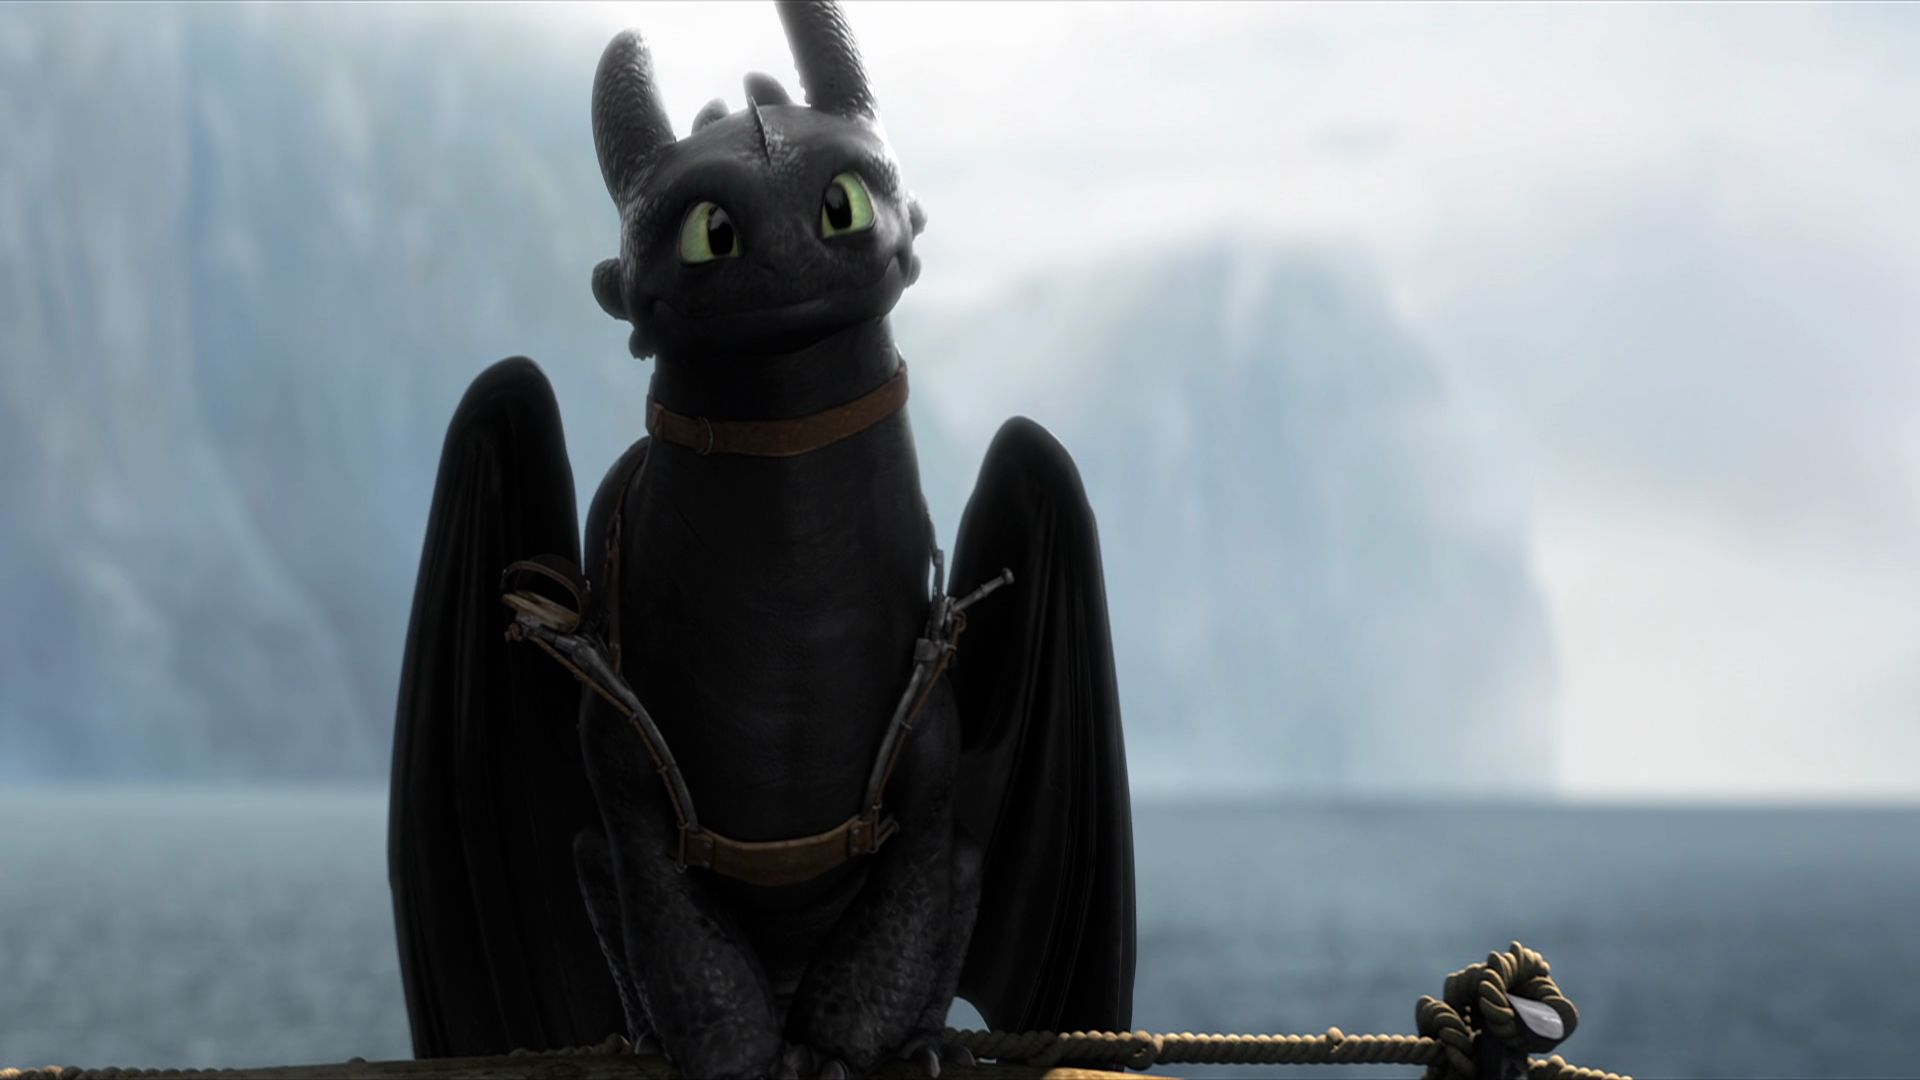 how to train your dragon, toothless (how to train your dragon), movie, how to train your dragon 2